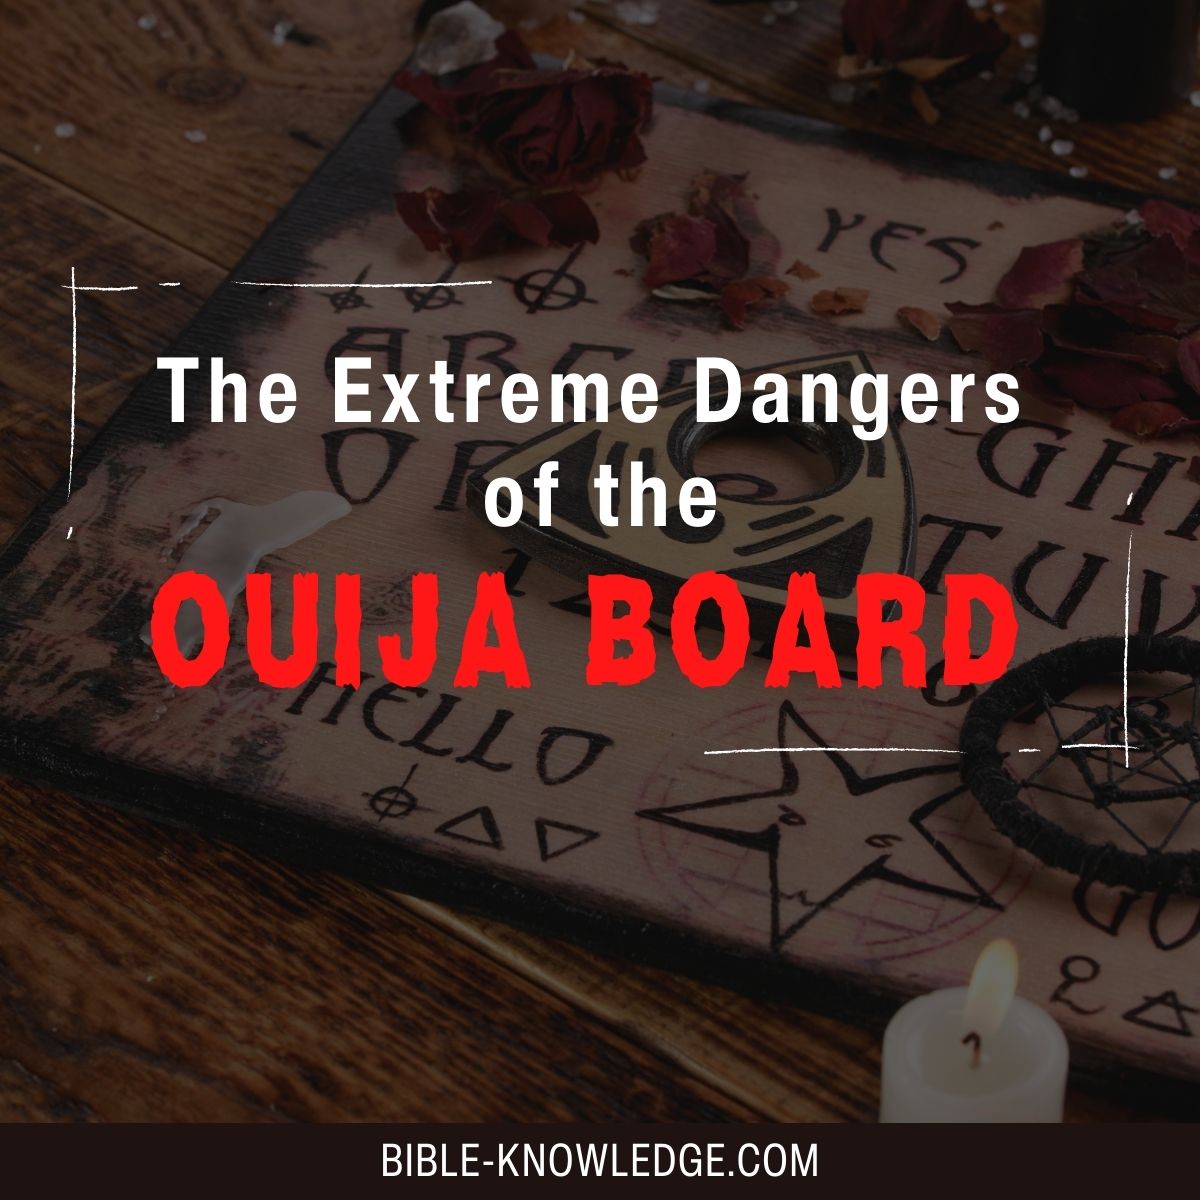 The Extreme Dangers of the Ouija Board